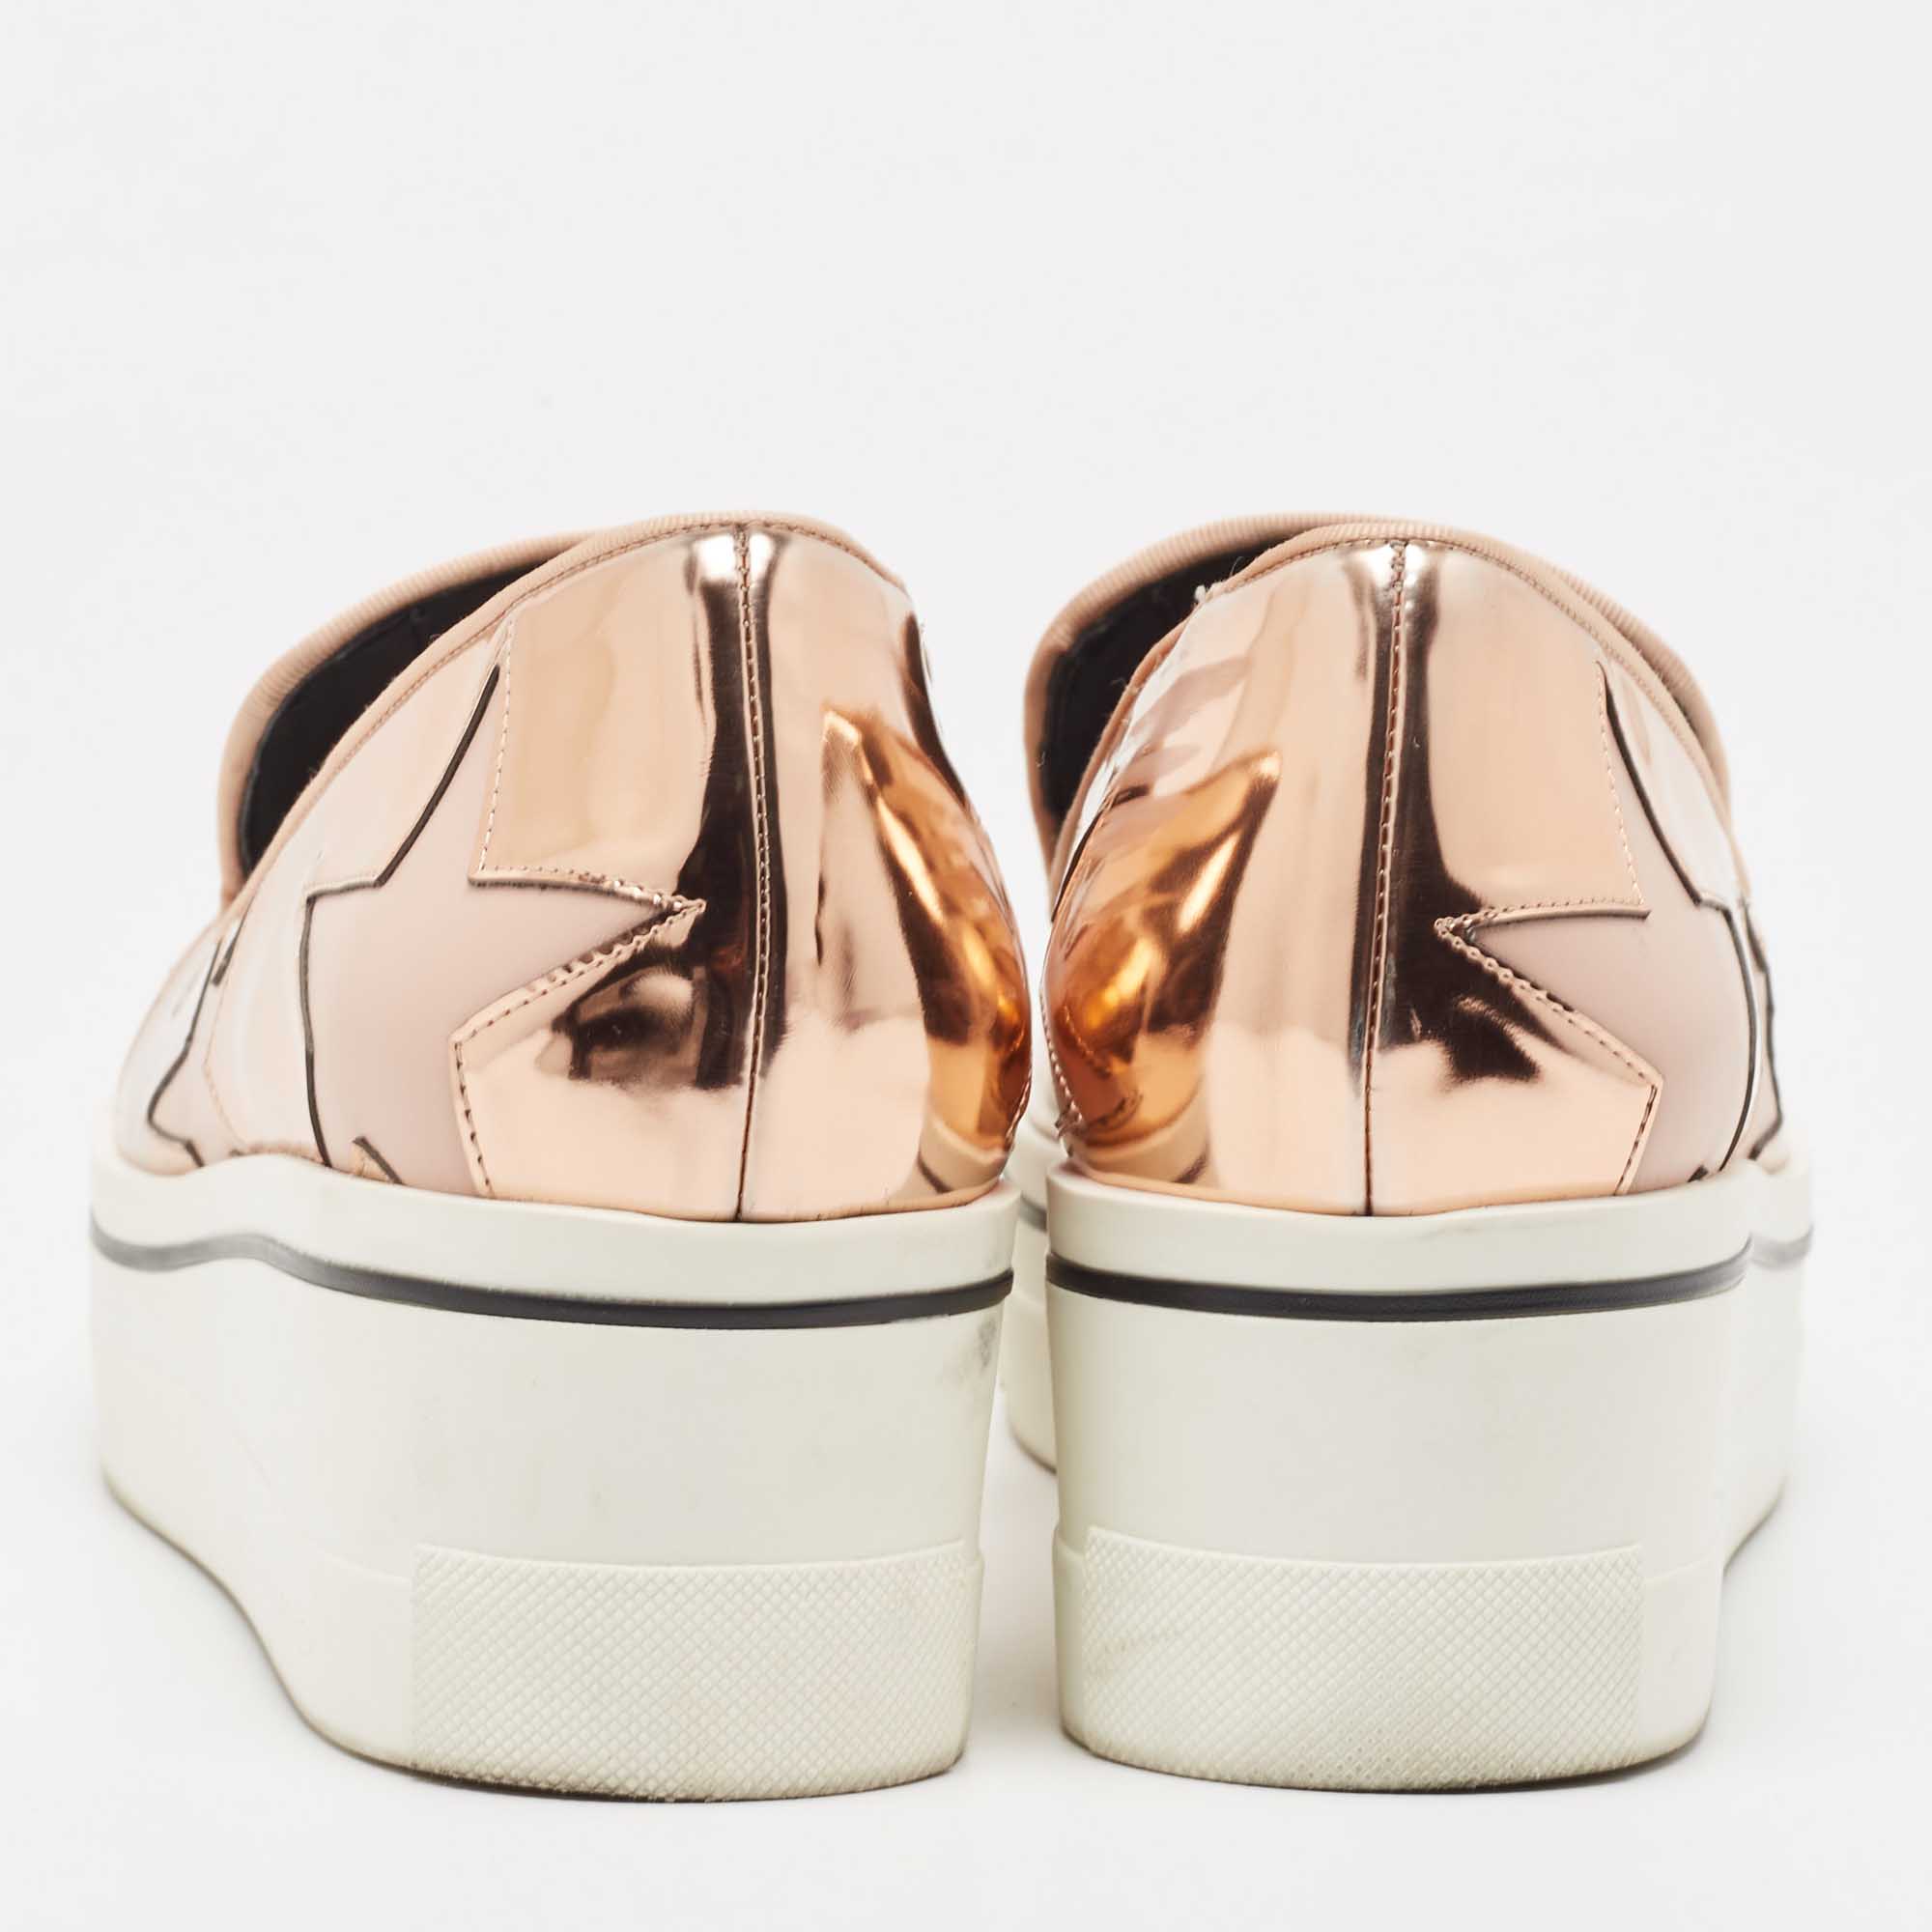 Stella McCartney Rose Gold Faux Leather Binx Star Sneakers Size 39